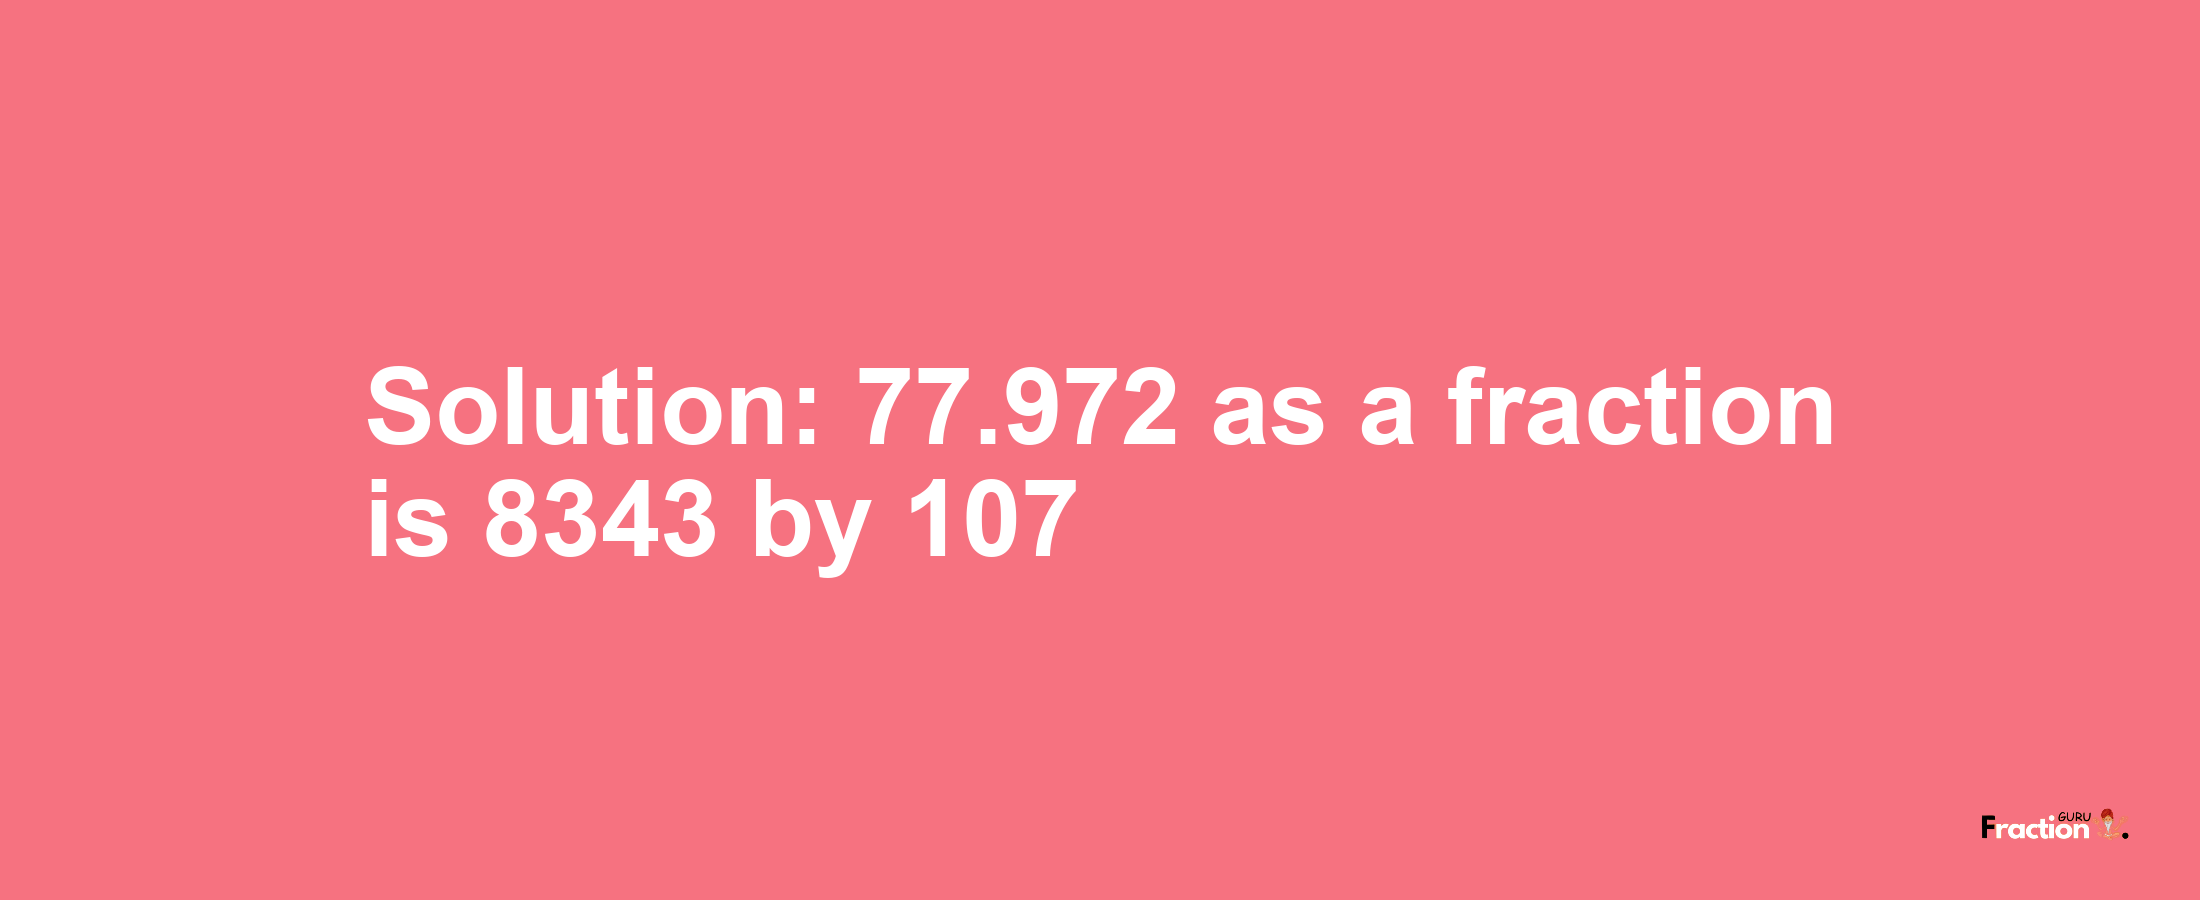 Solution:77.972 as a fraction is 8343/107